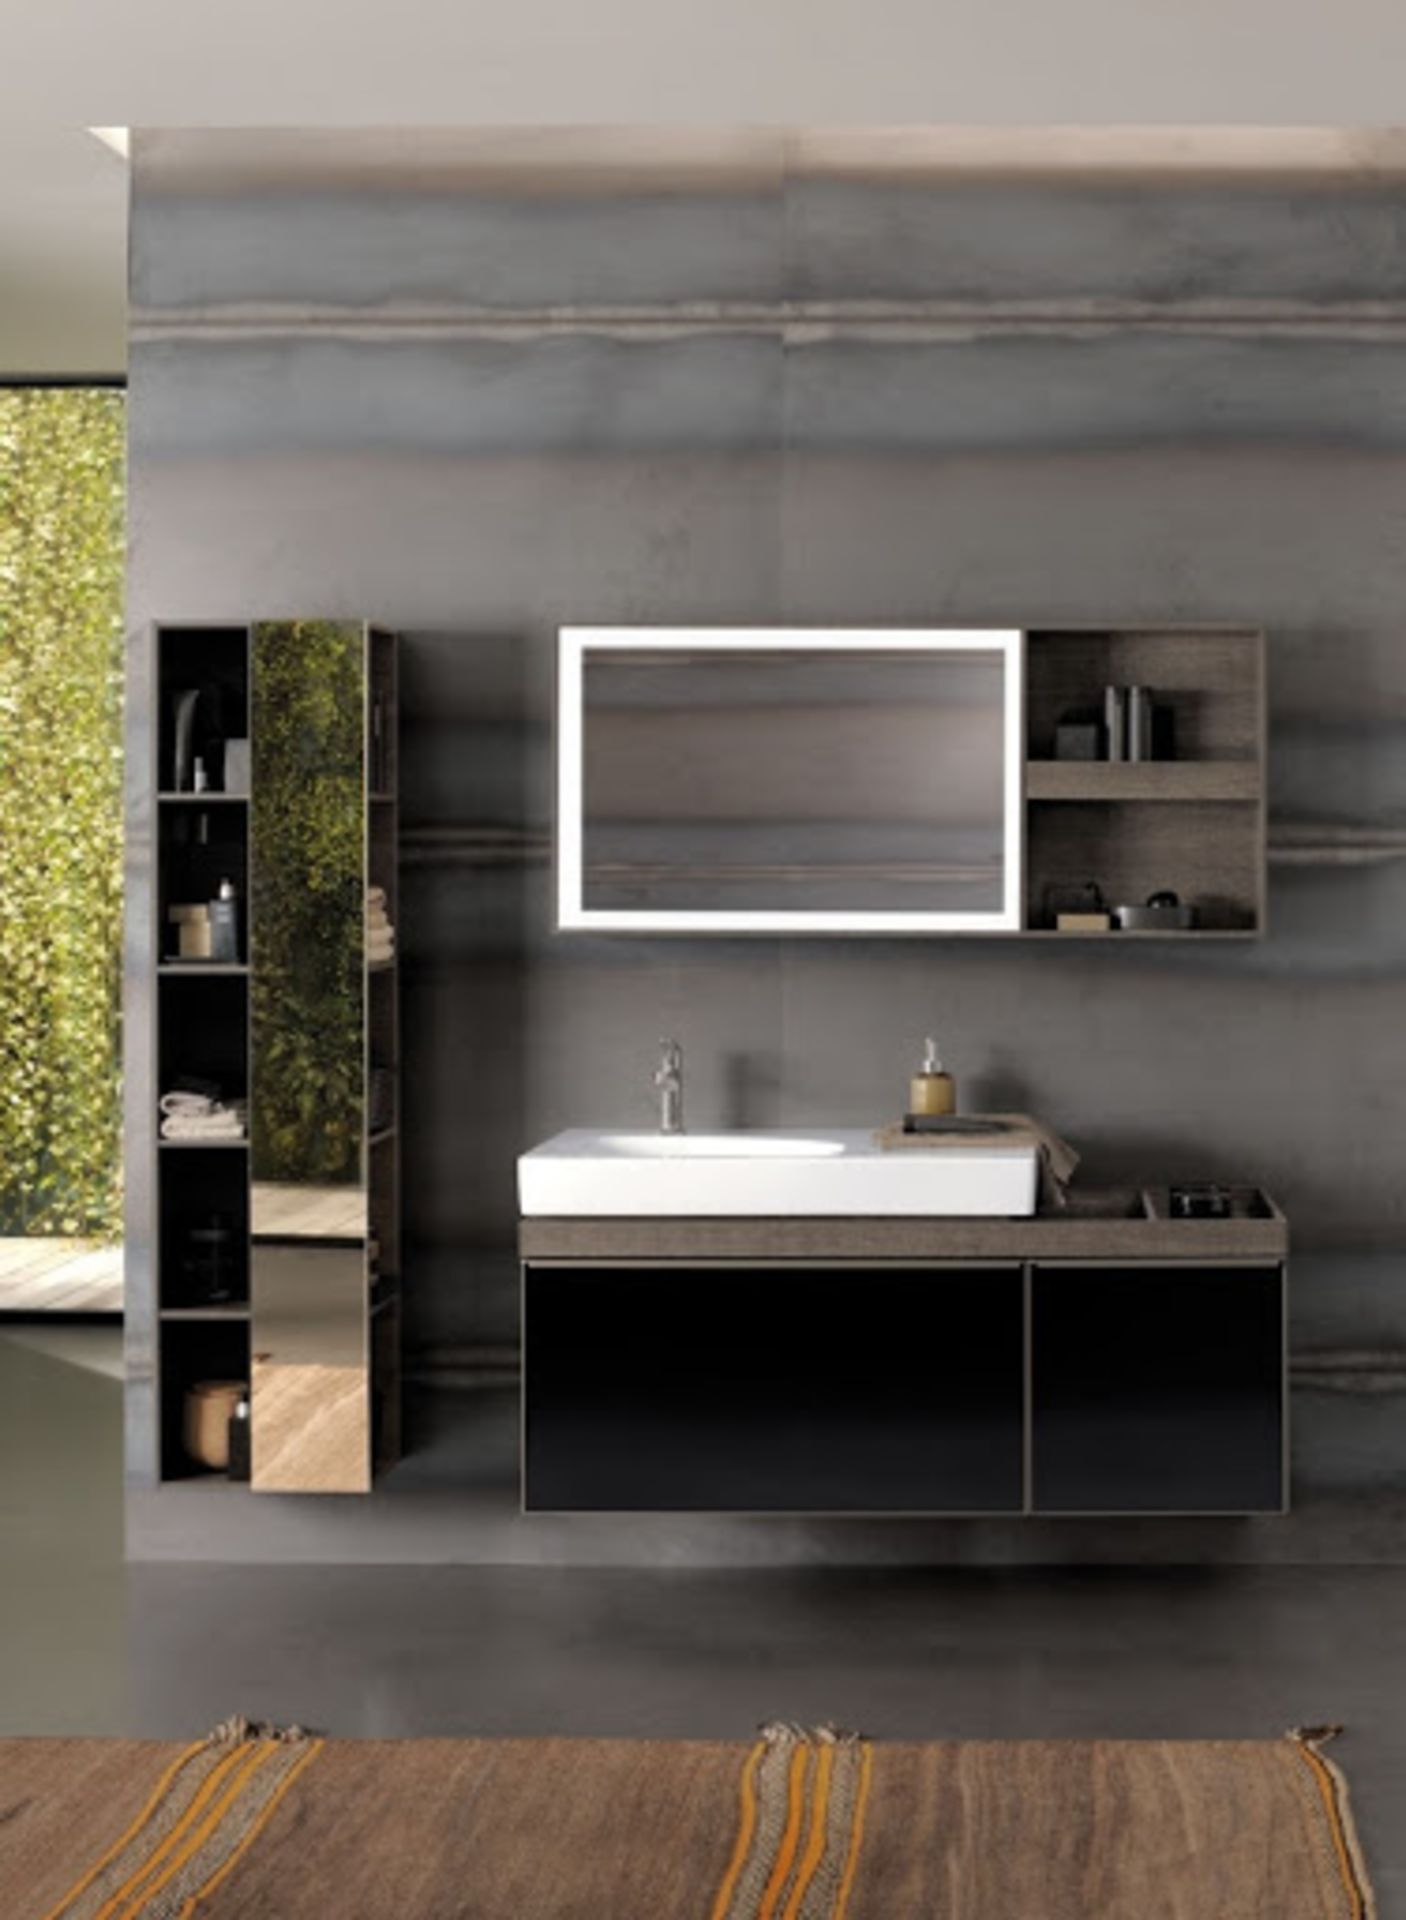 (PC9) Keramag Citterio Grey/Brown Illuminated Mirror With shelf Right/Left. RRP £579.99. 1334x...( - Image 2 of 4